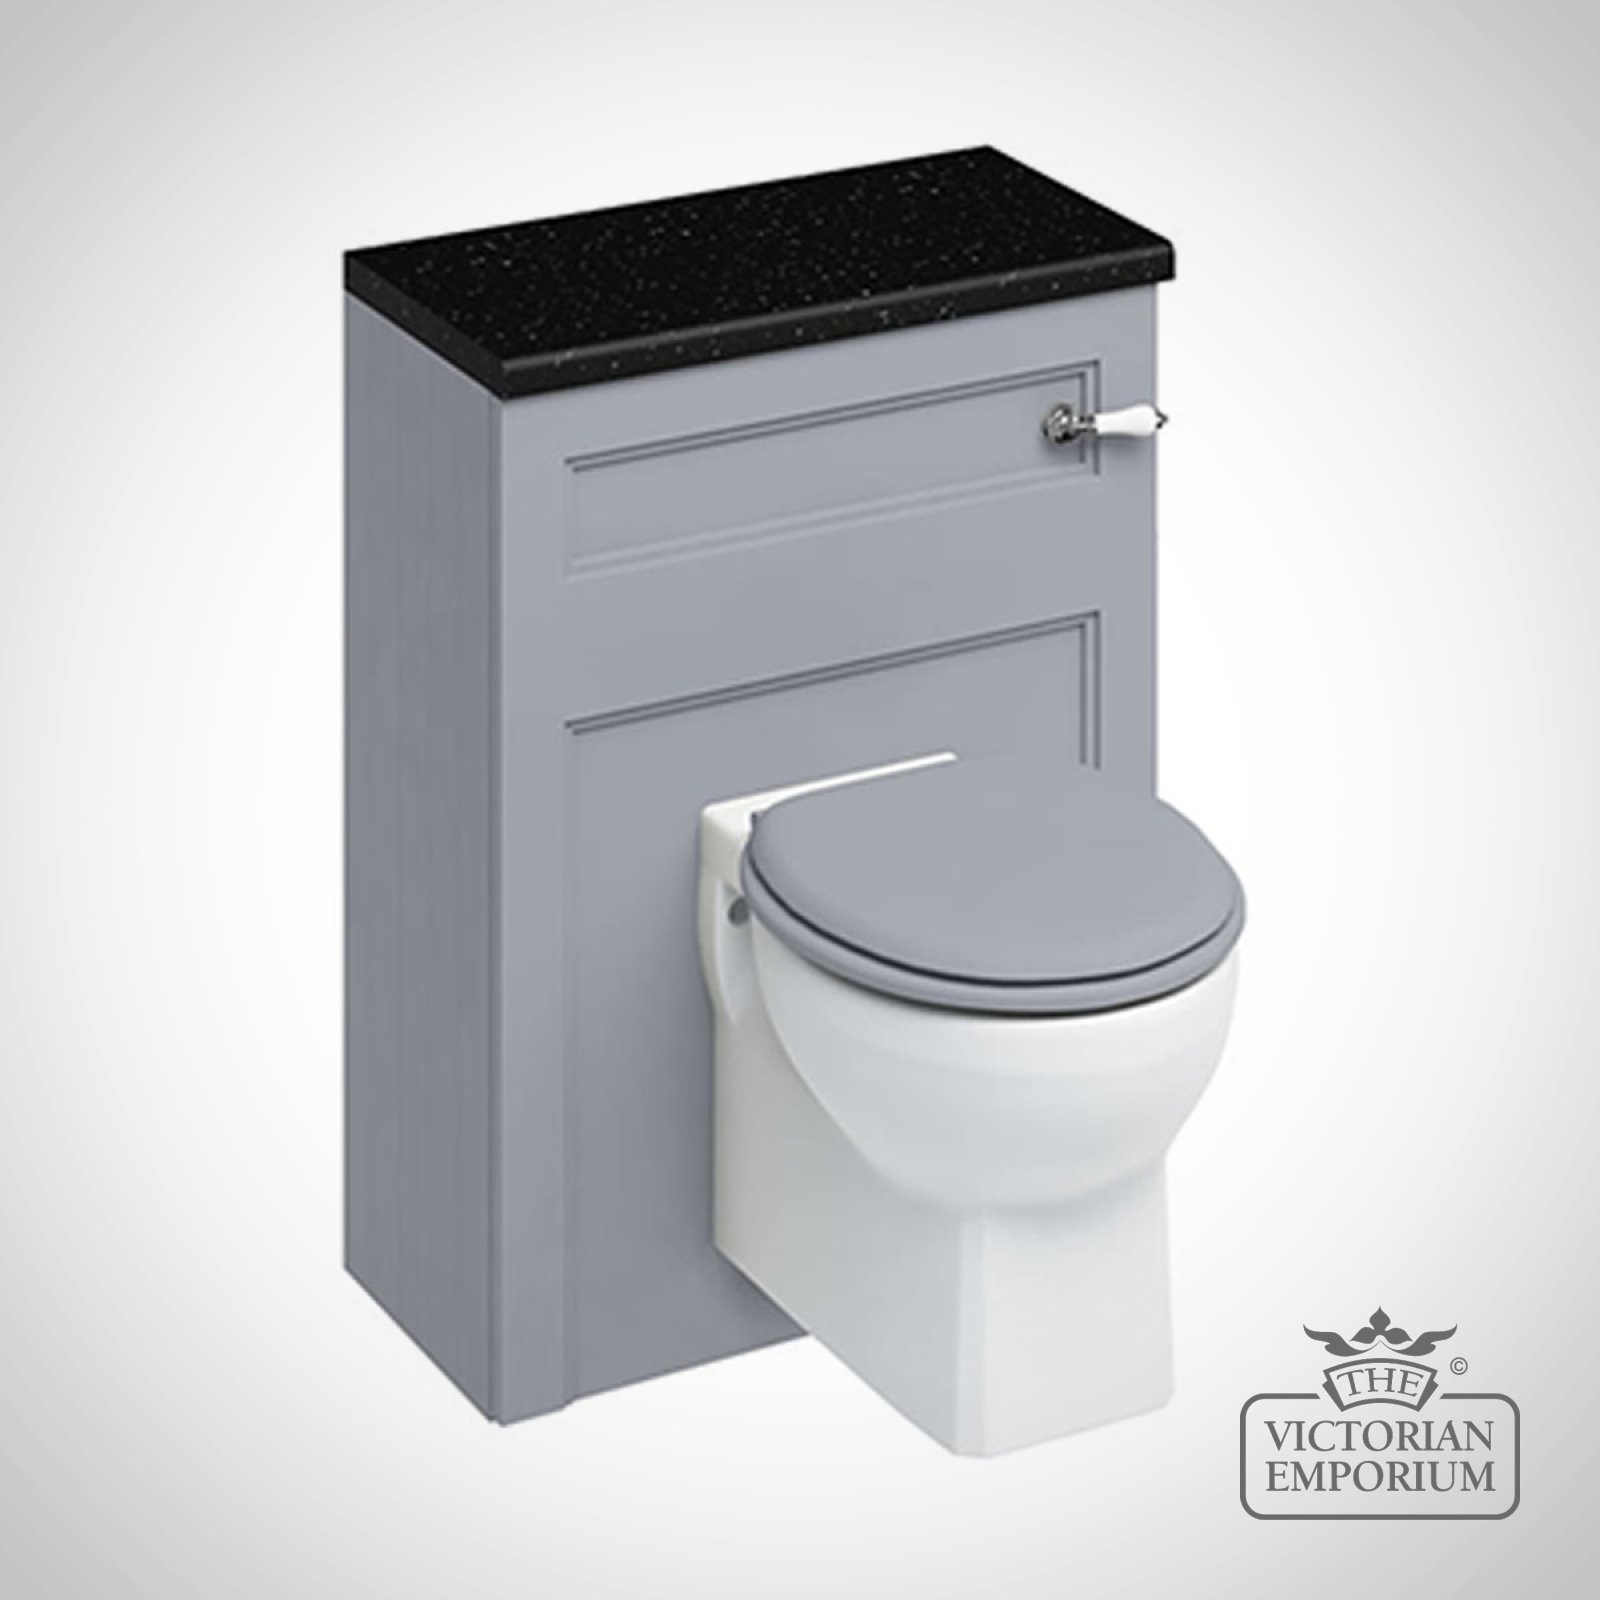 60 Wall hung WC Unit including the cistern tank and WC - in a choice of colours